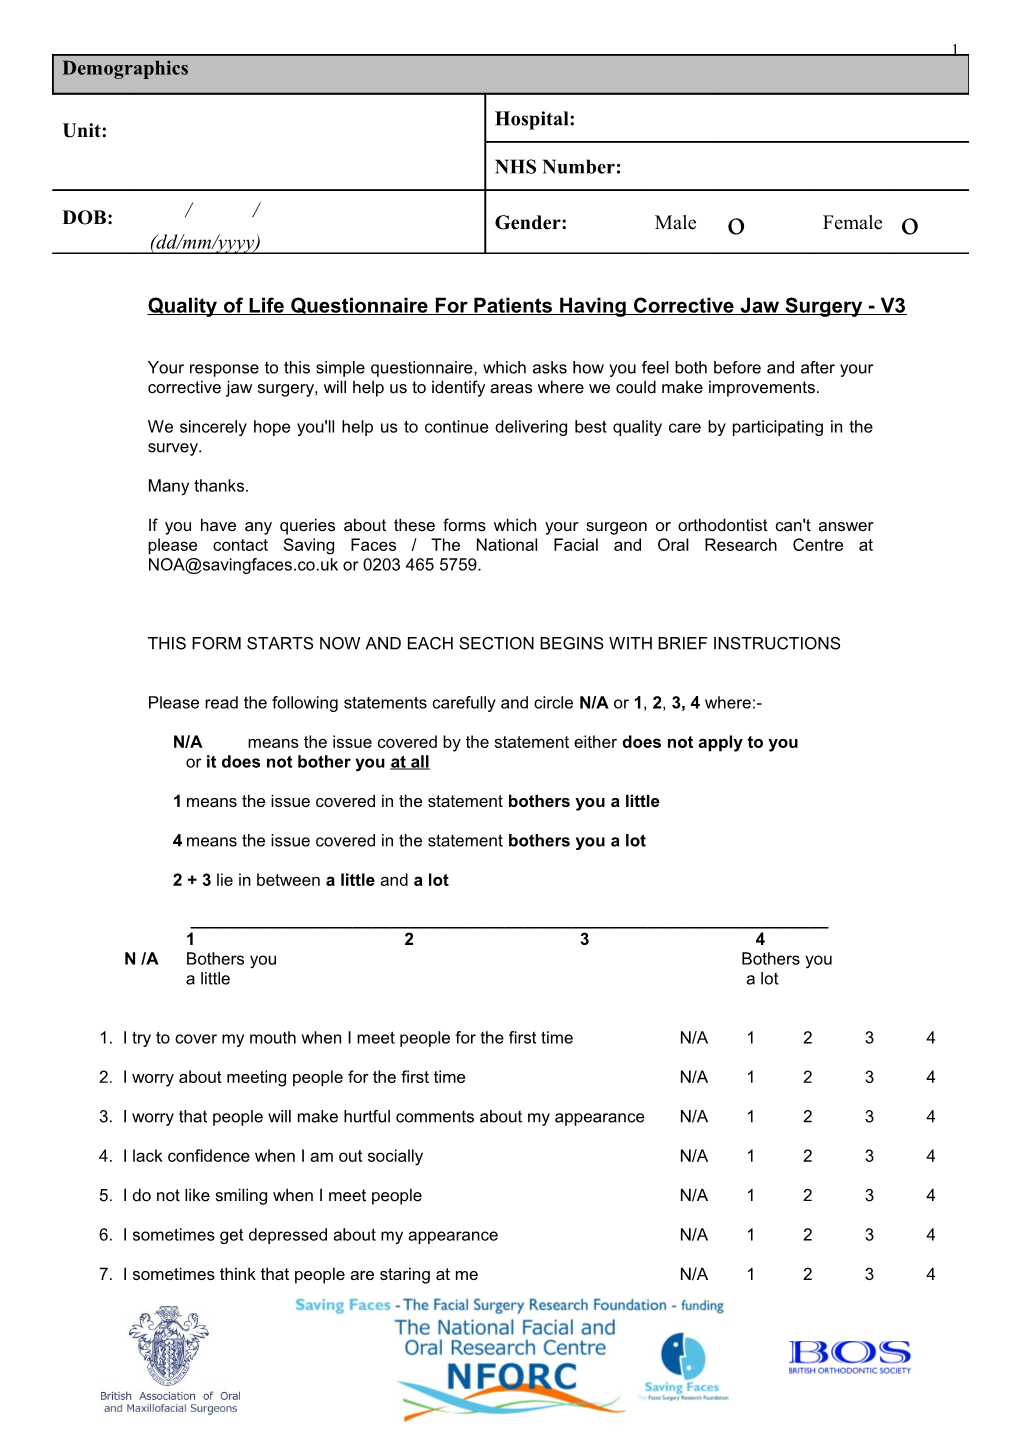 Quality of Life Questionnaire for Patients Having Corrective Jaw Surgery - V3